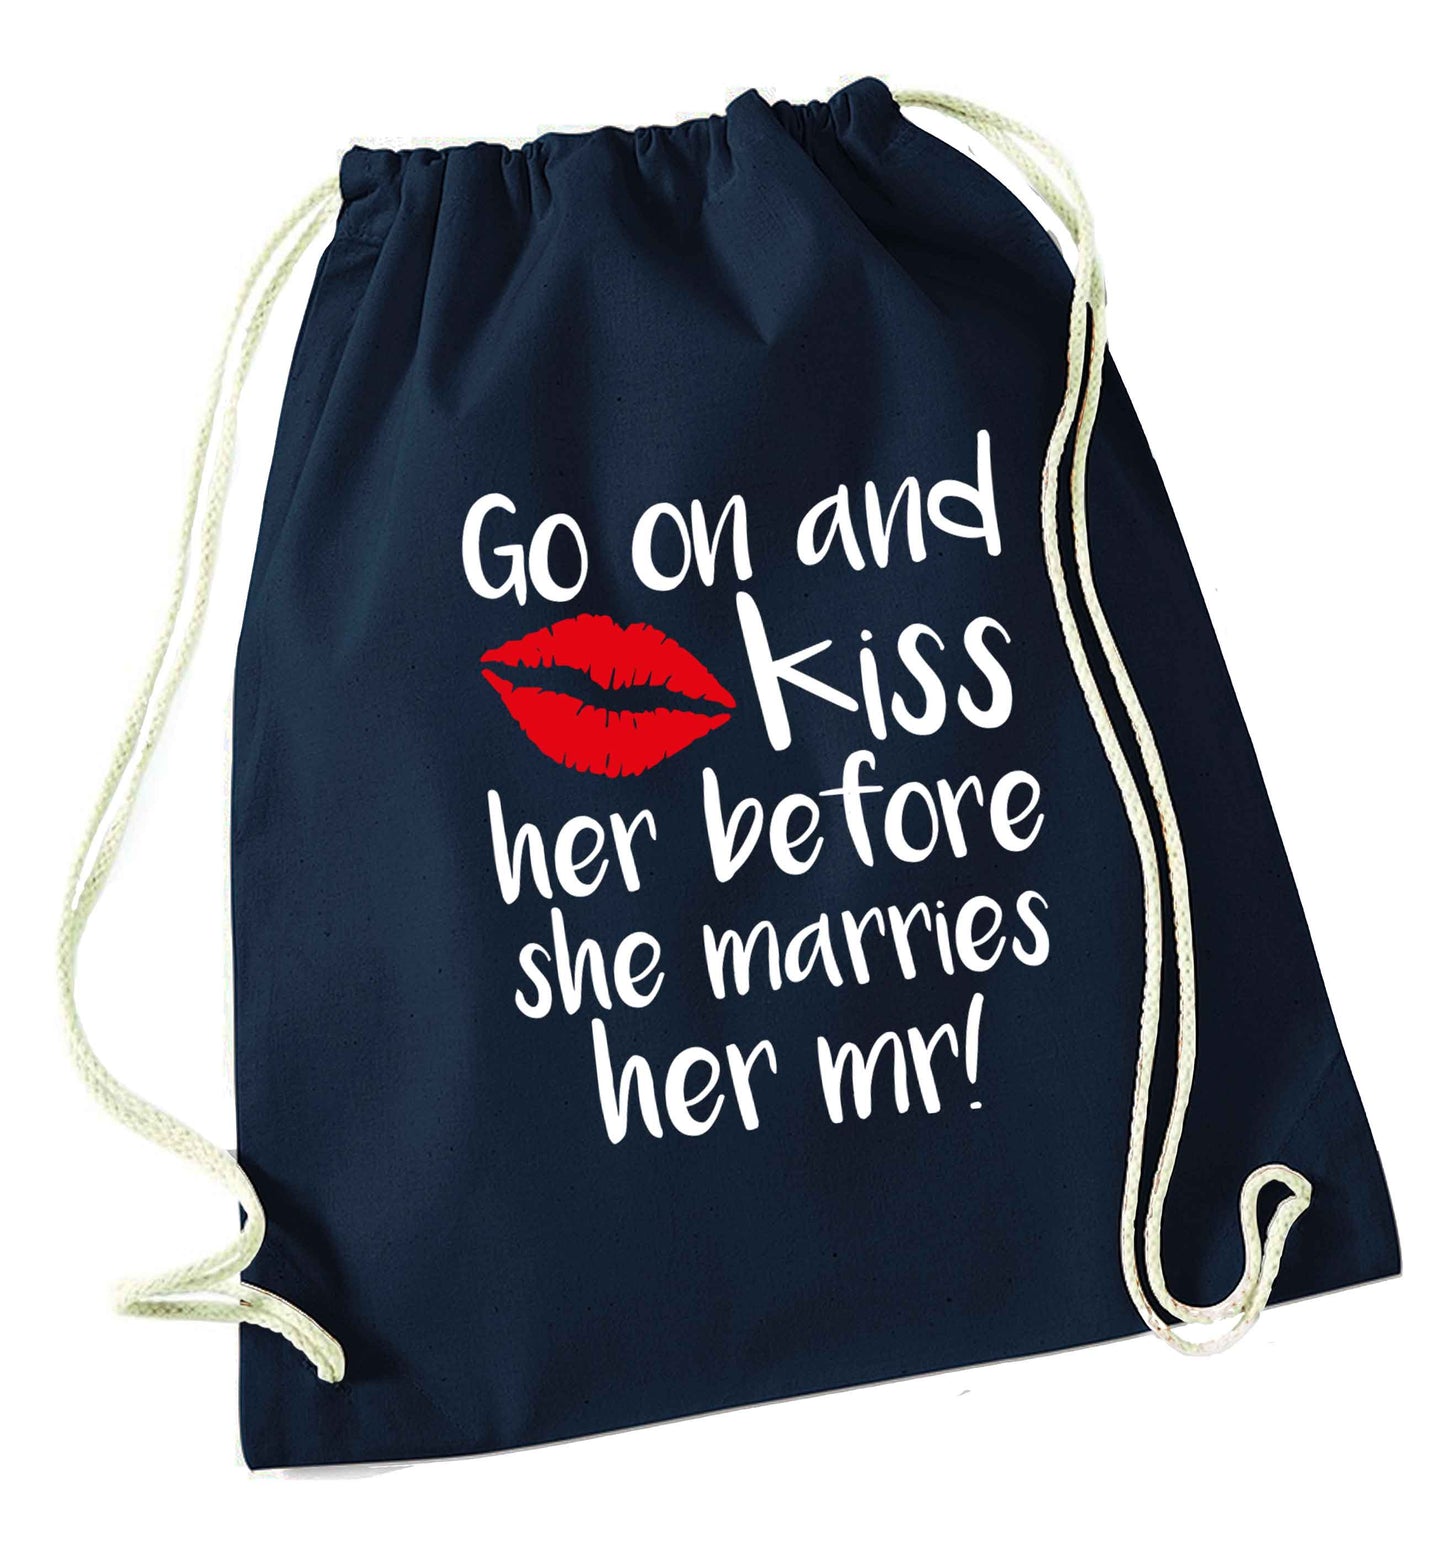 Kiss her before she marries her mr! navy drawstring bag